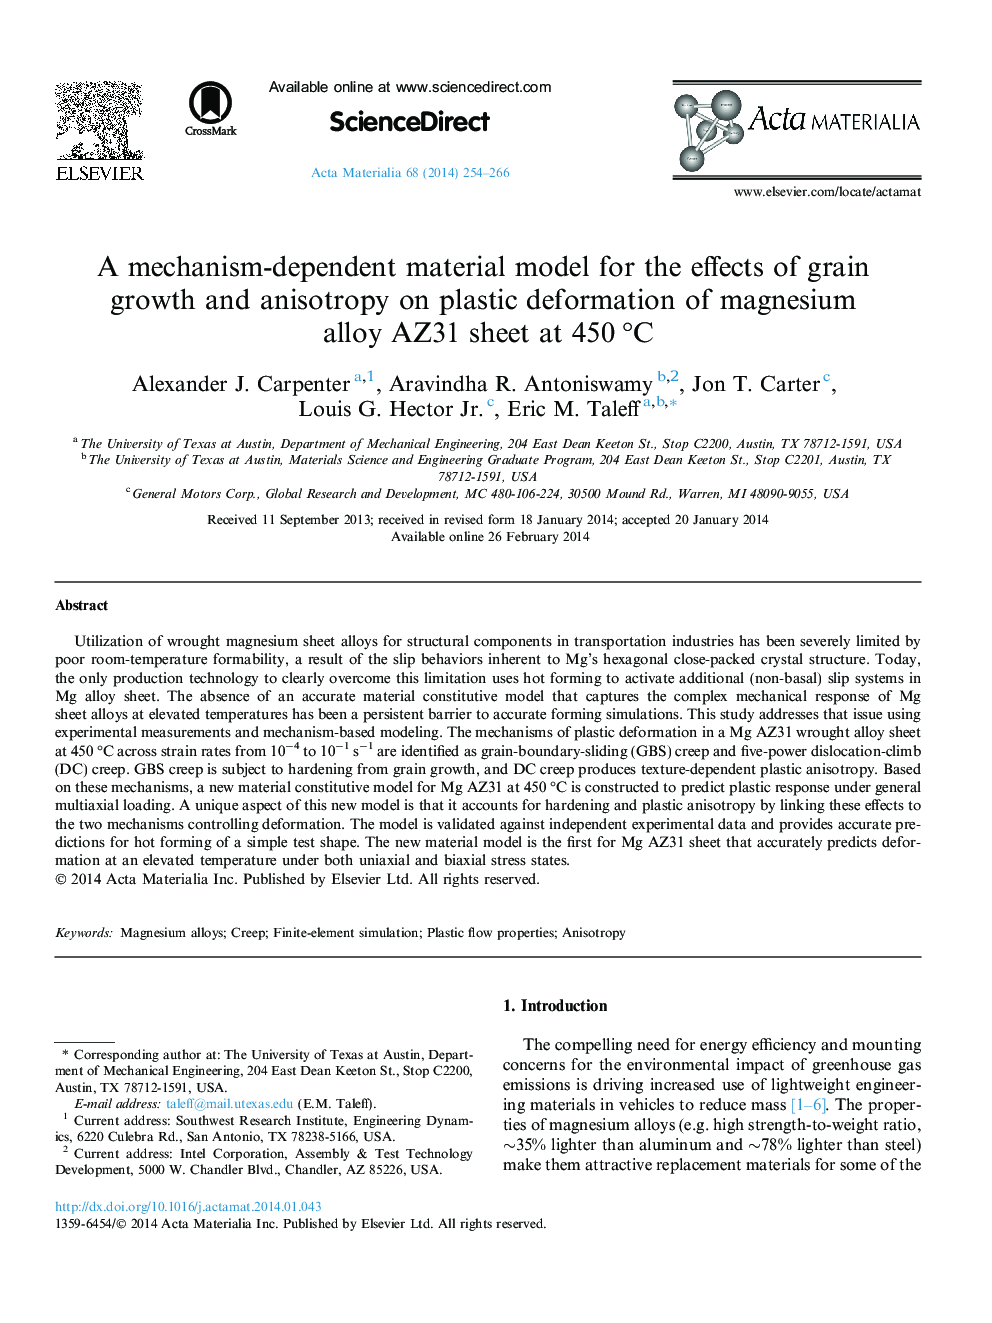 A mechanism-dependent material model for the effects of grain growth and anisotropy on plastic deformation of magnesium alloy AZ31 sheet at 450Â Â°C